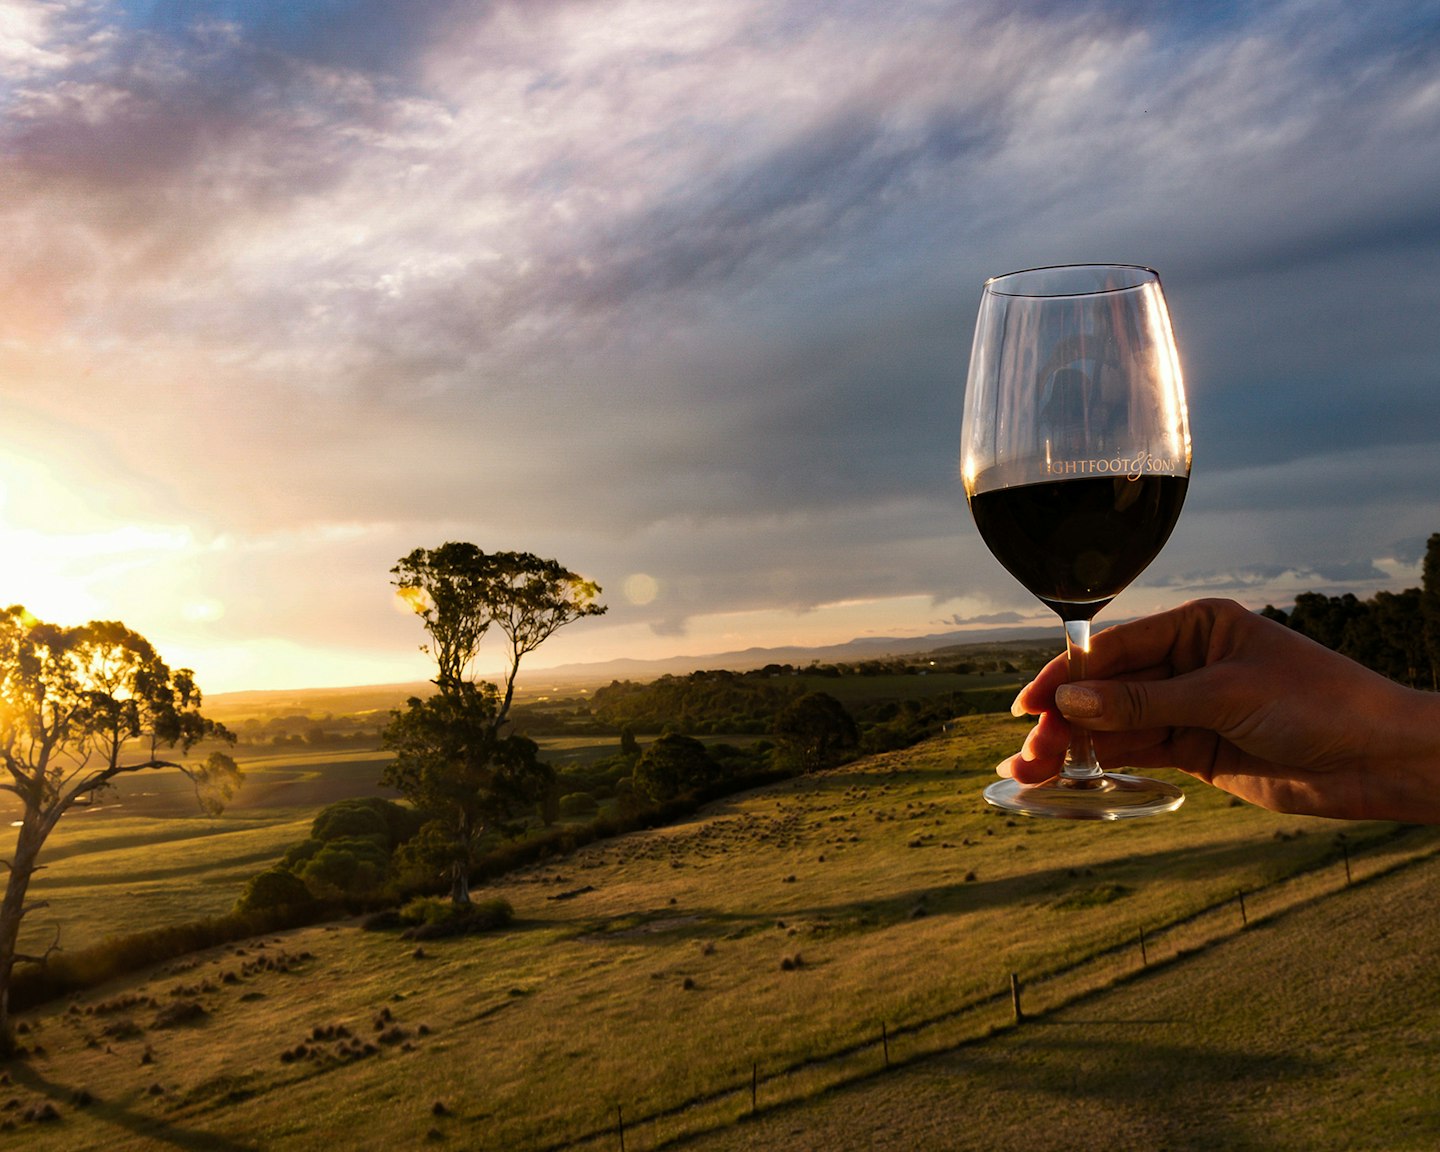 induldge on fresh local produce and visit winery cellar doors in east gippsland